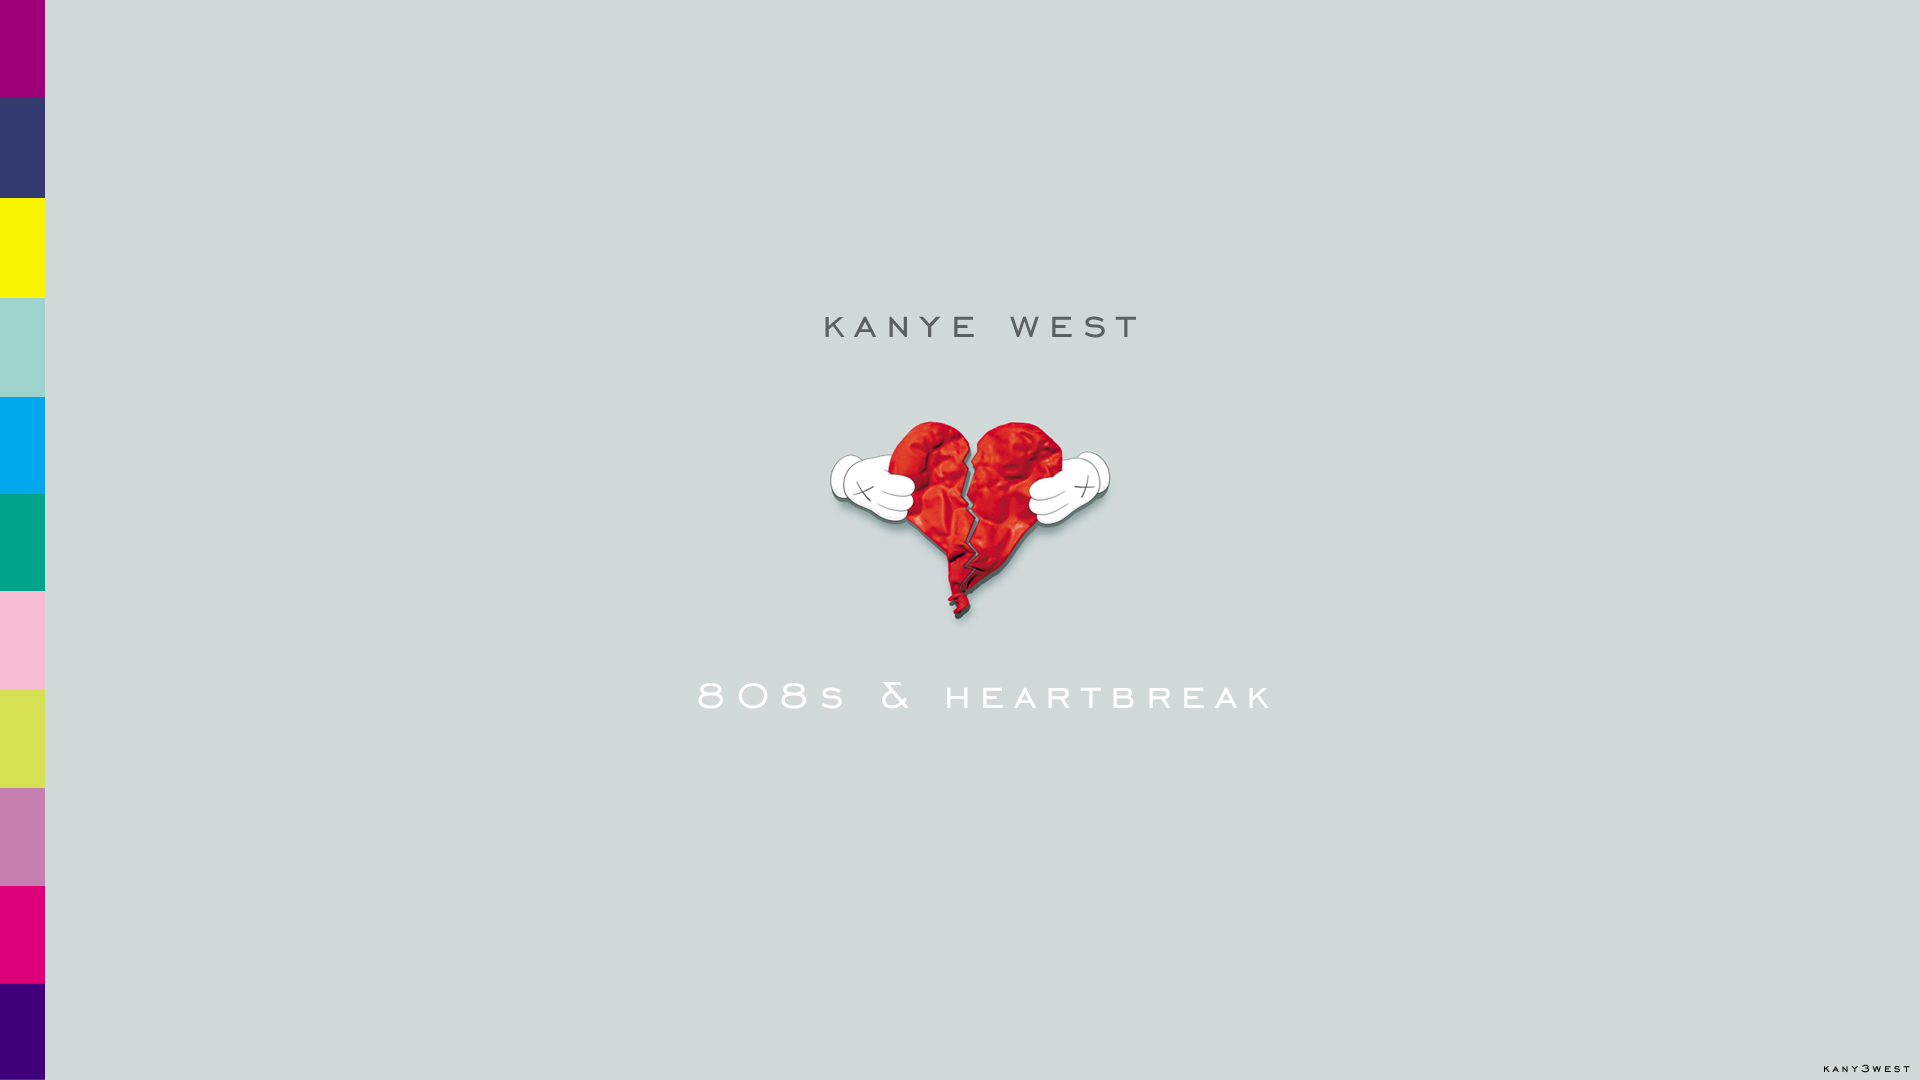 who is 808s and heartbreak about